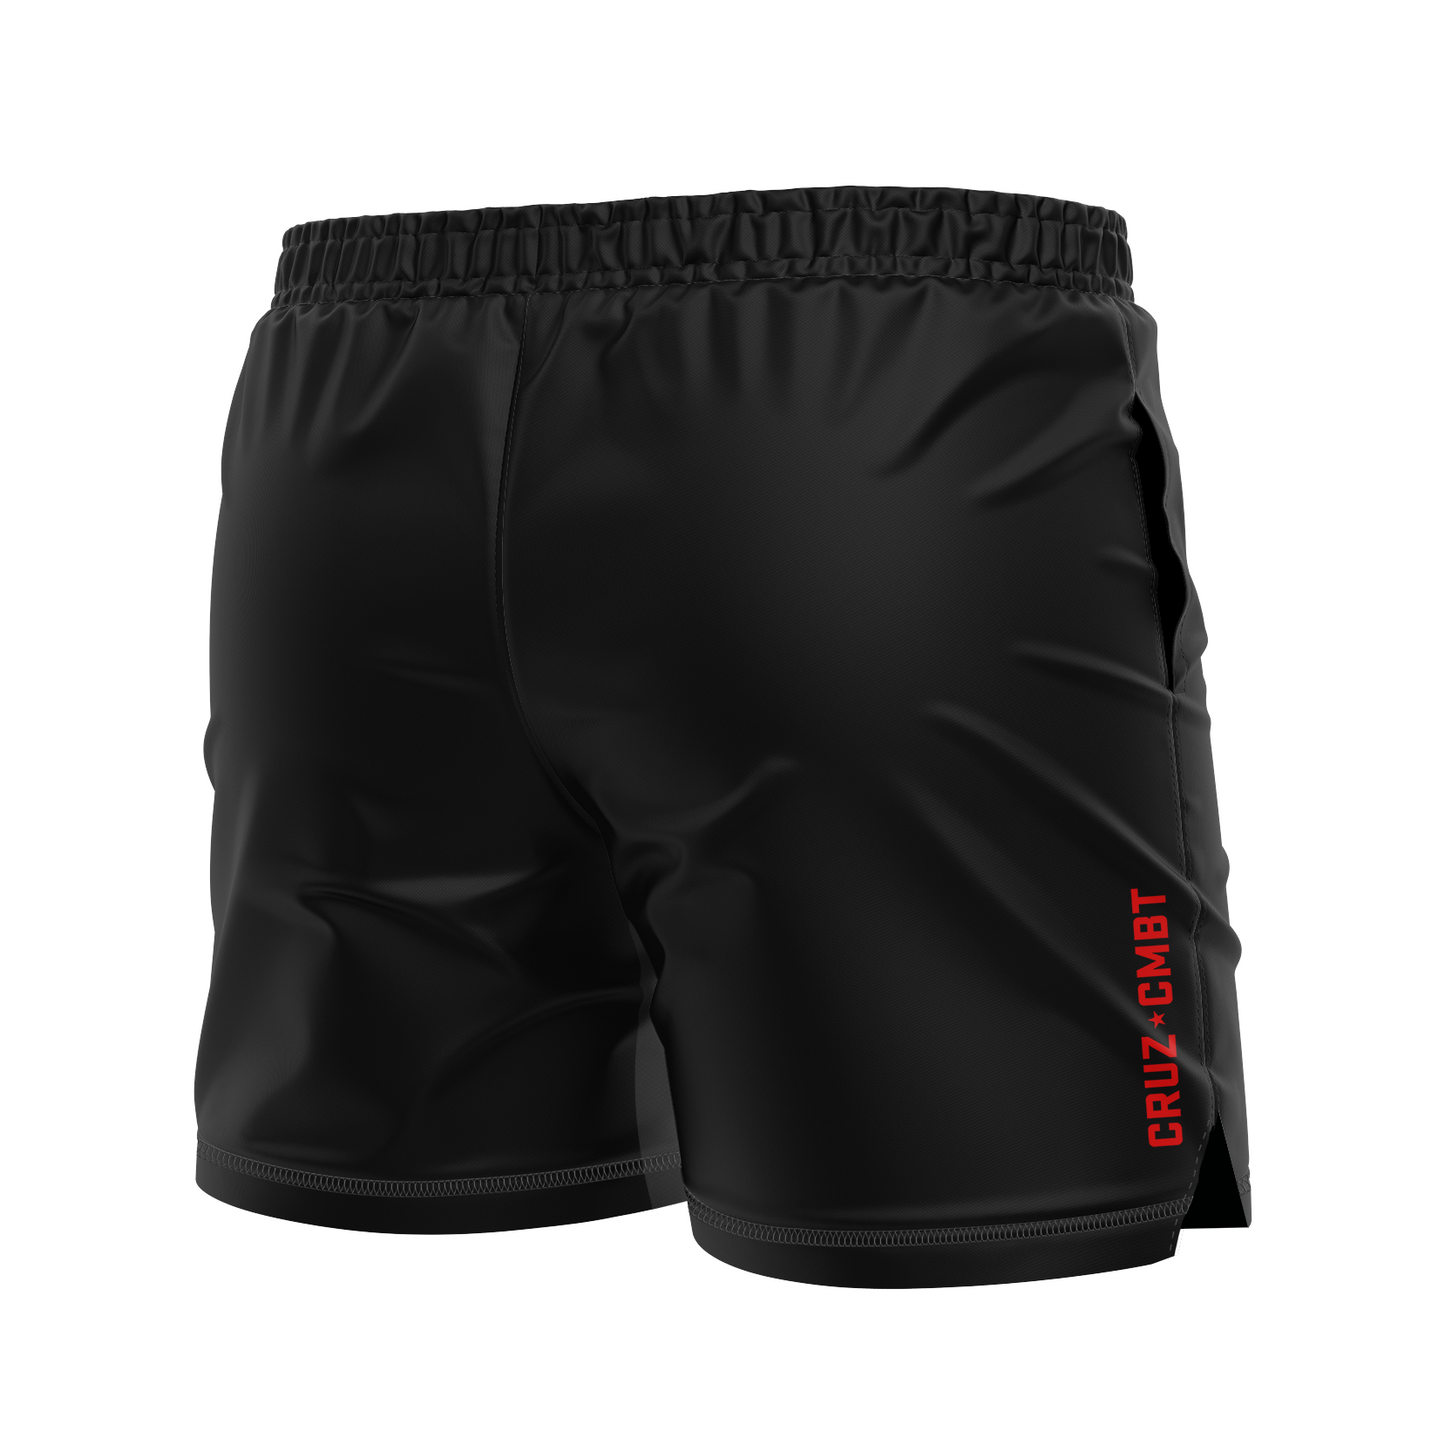 Base Collection men's FC shorts, black and red